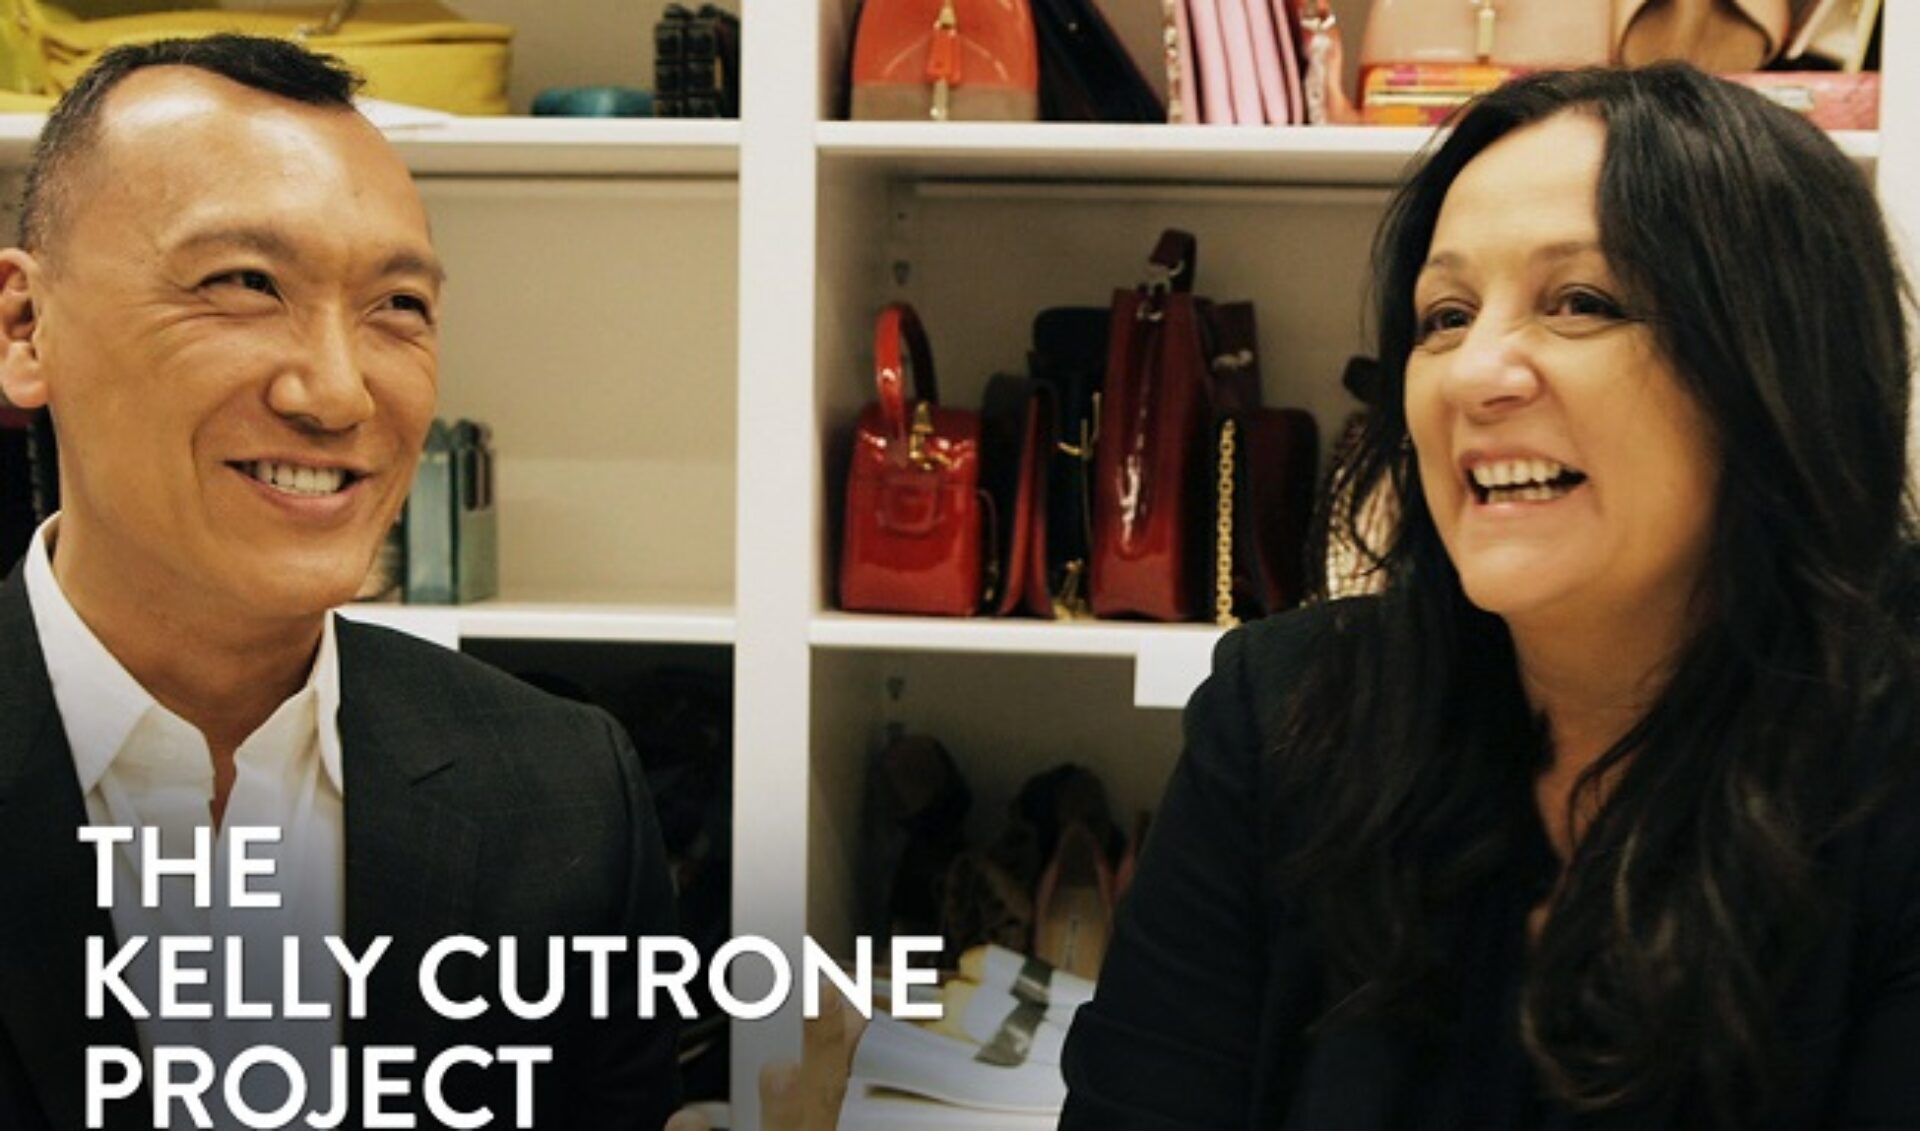 CW Seed Launches ‘Kelly Cutrone Project’ With Elle Magazine’s Joe Zee